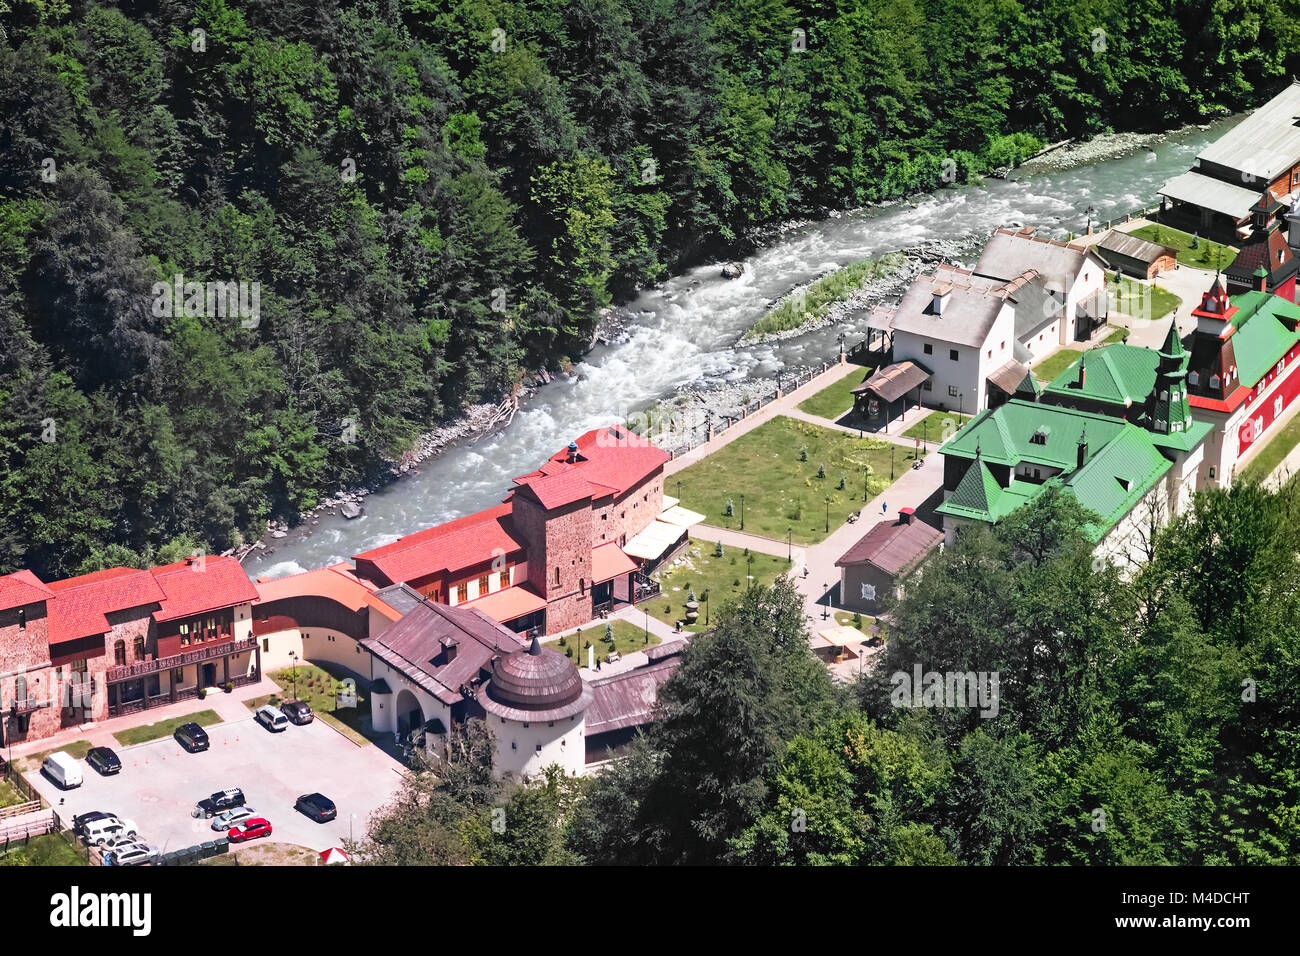 Hotel complex in the mountains near the river. Stock Photo